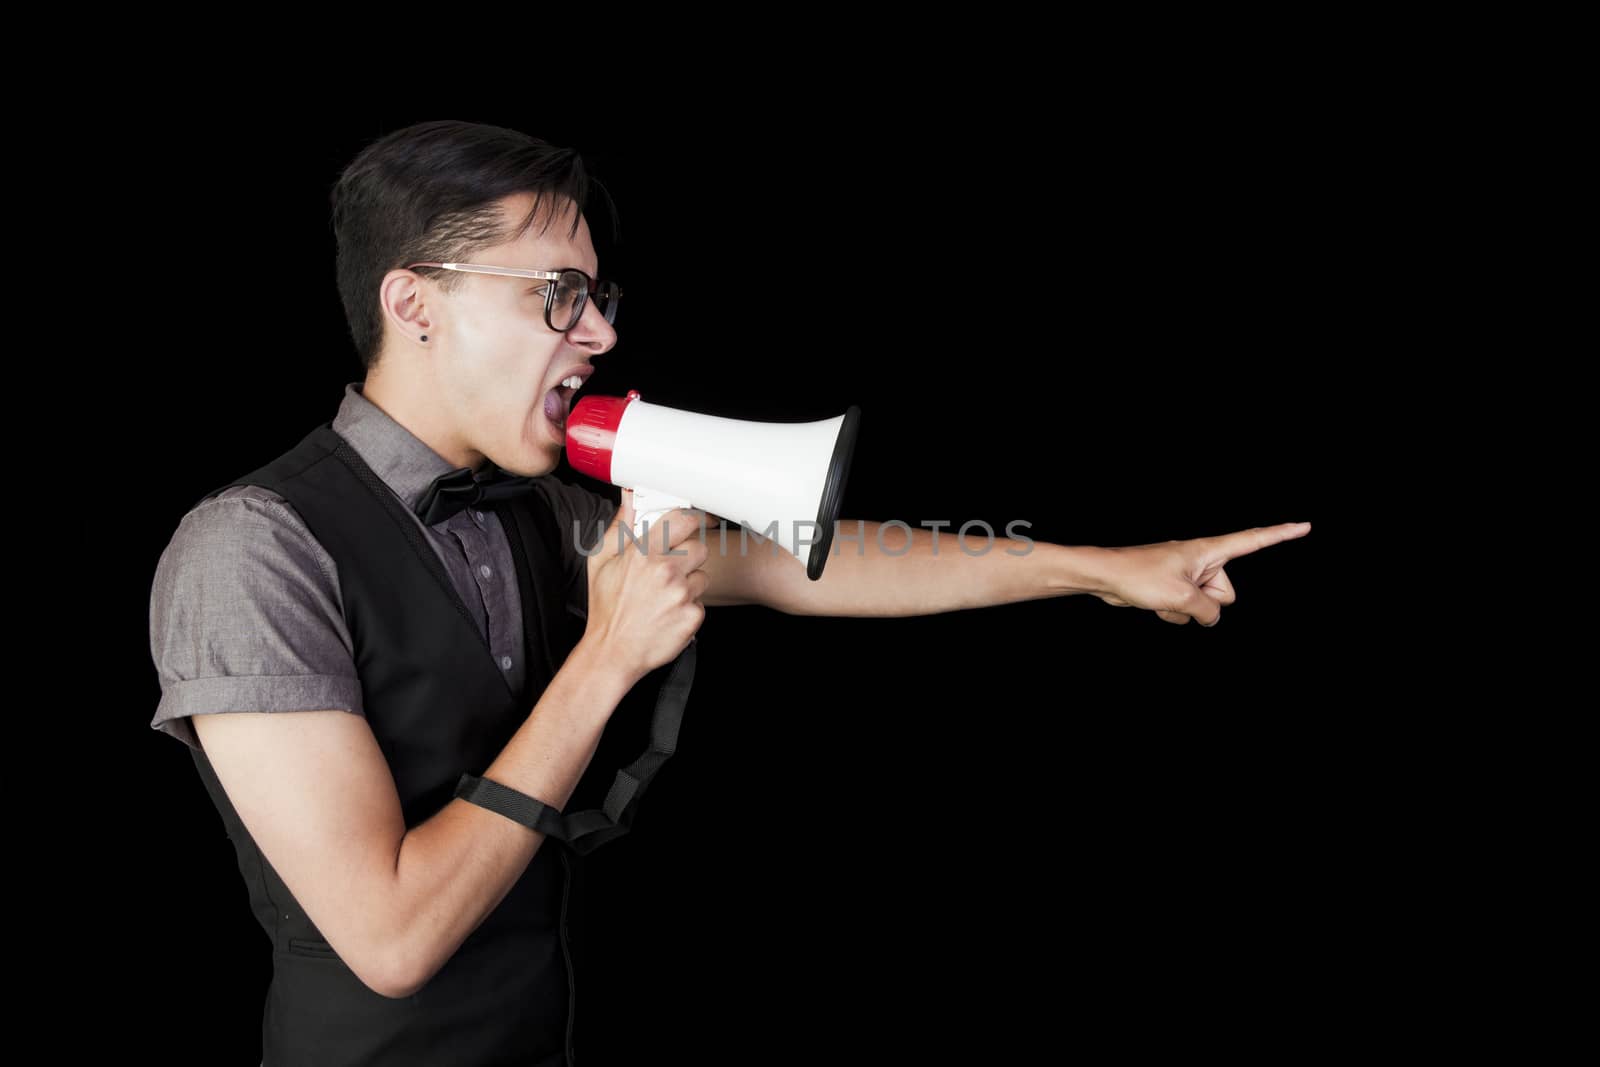 A young man shouting into a megaphone and pointing.